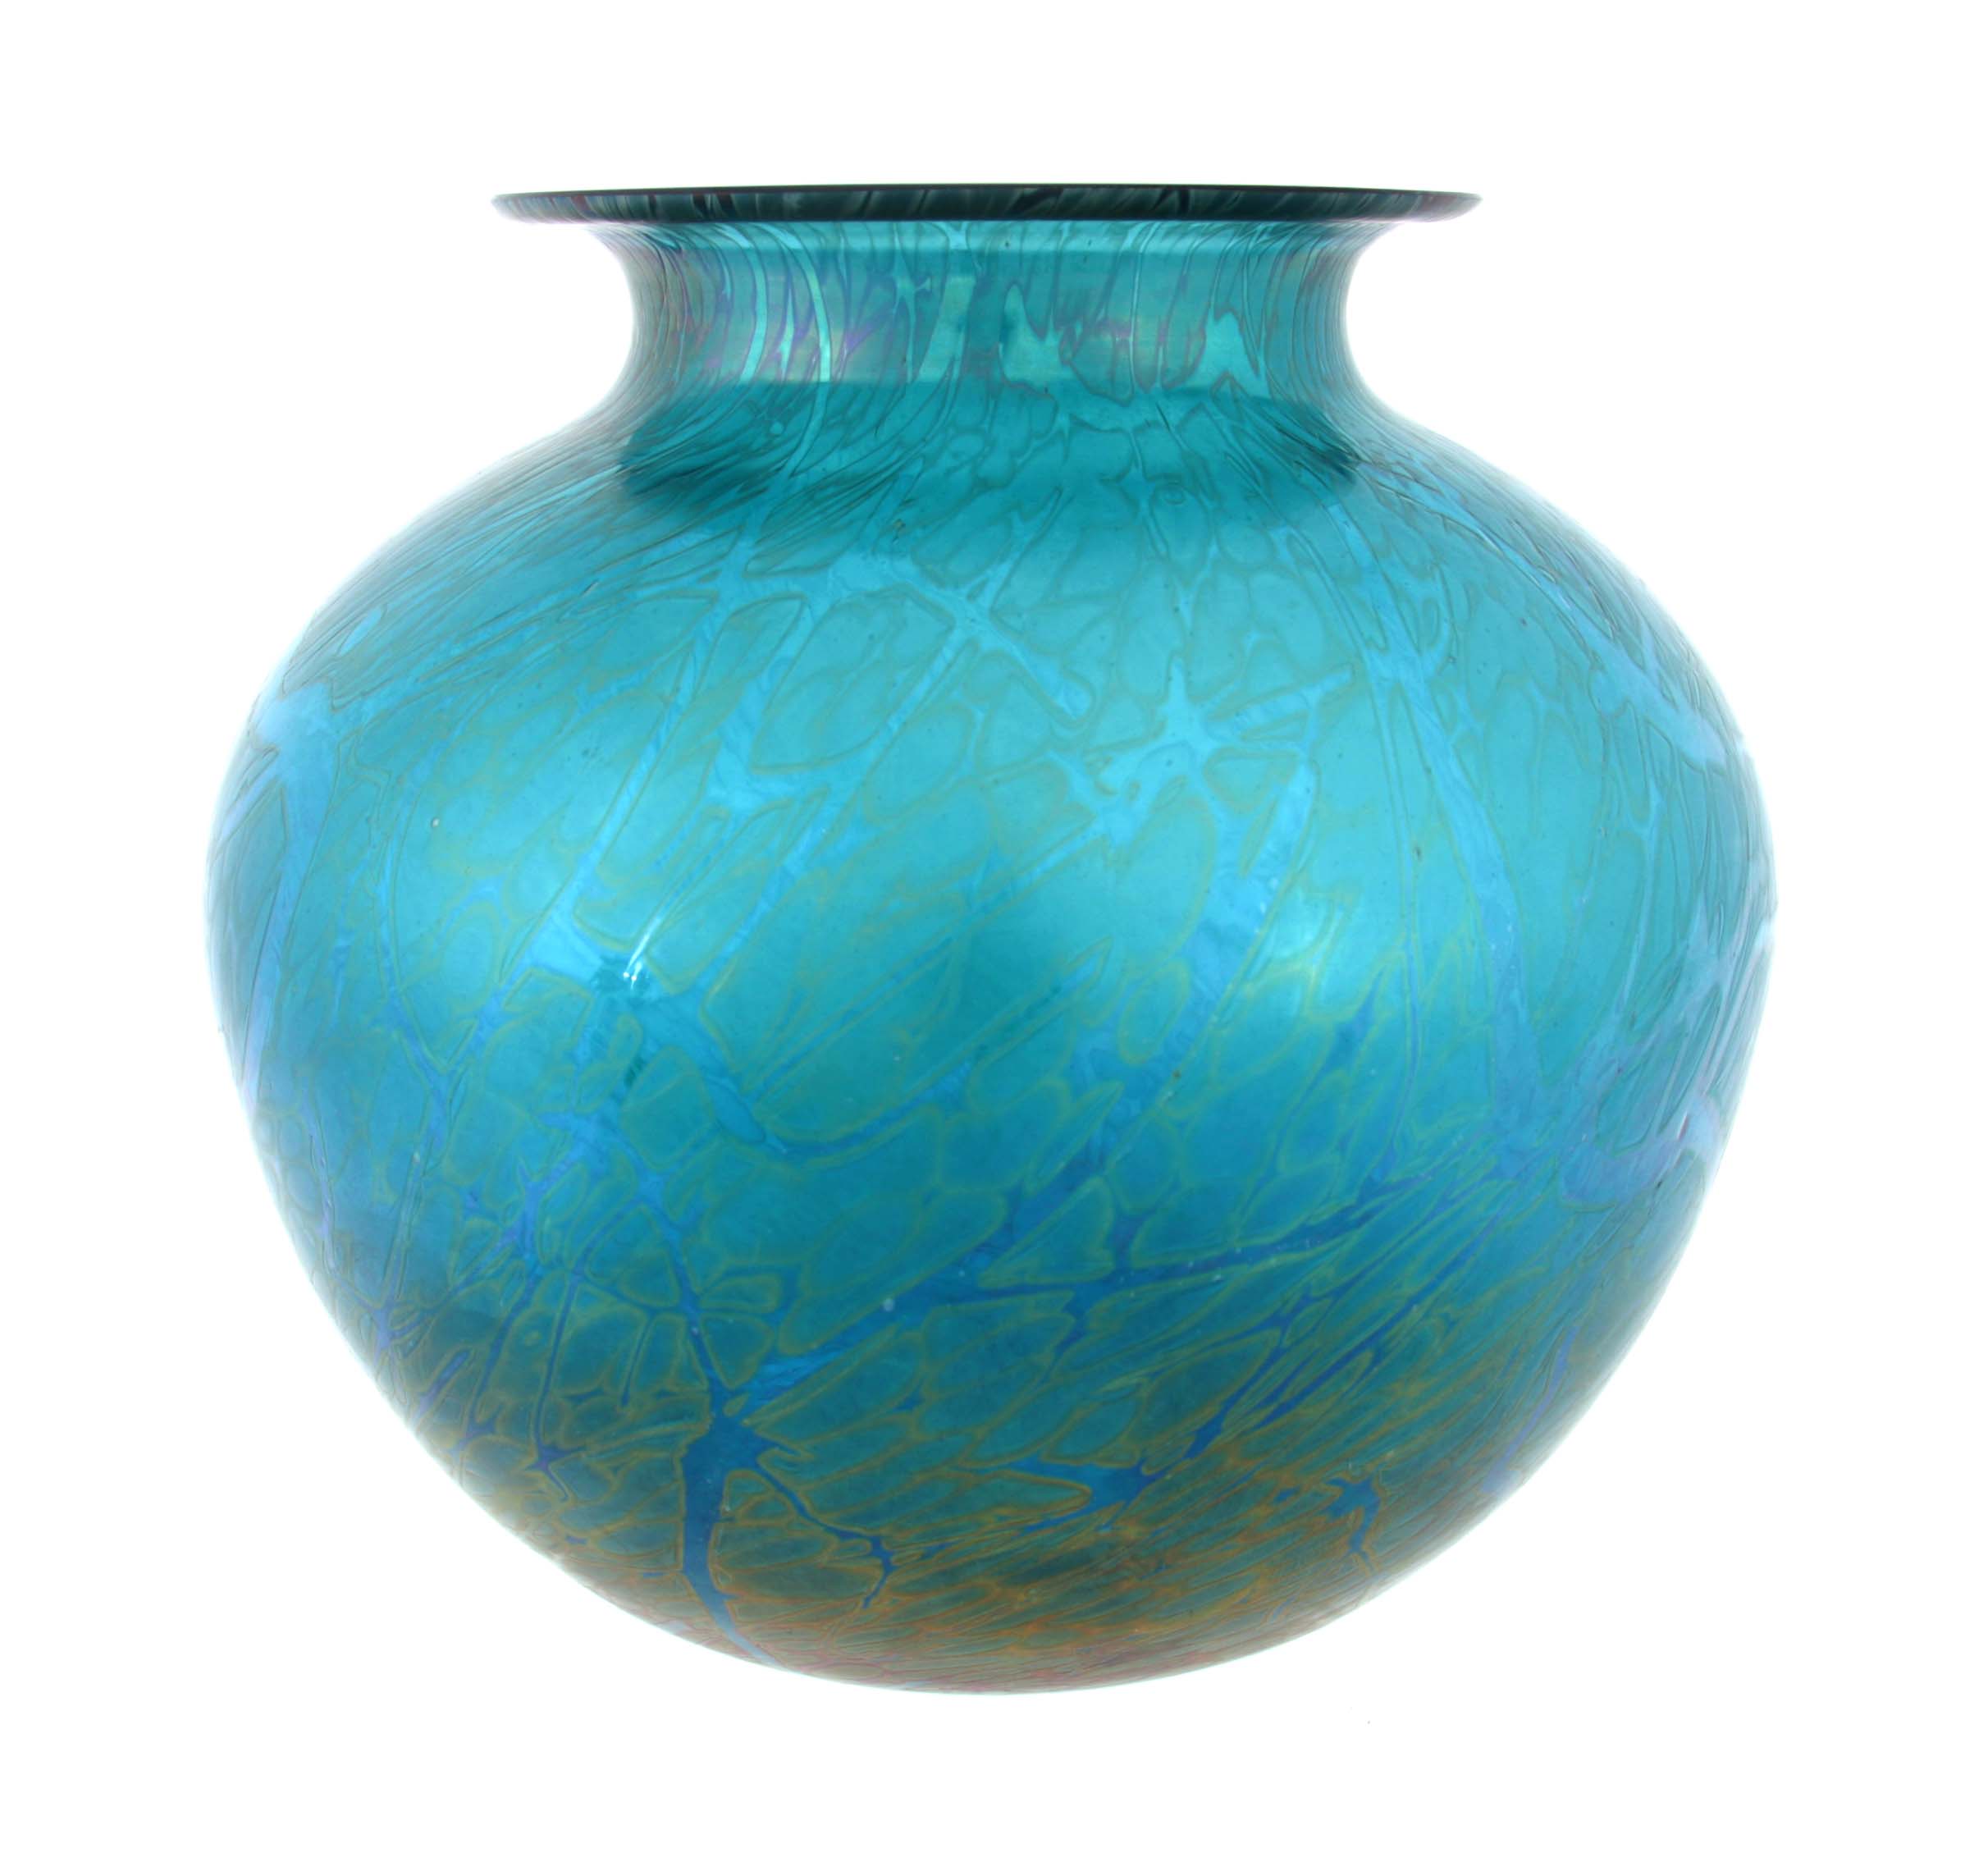 A ROYAL BRIERLEY IRIDESCENT GLASS VASE etched signature to the underside 15cm high 17cm diameter.